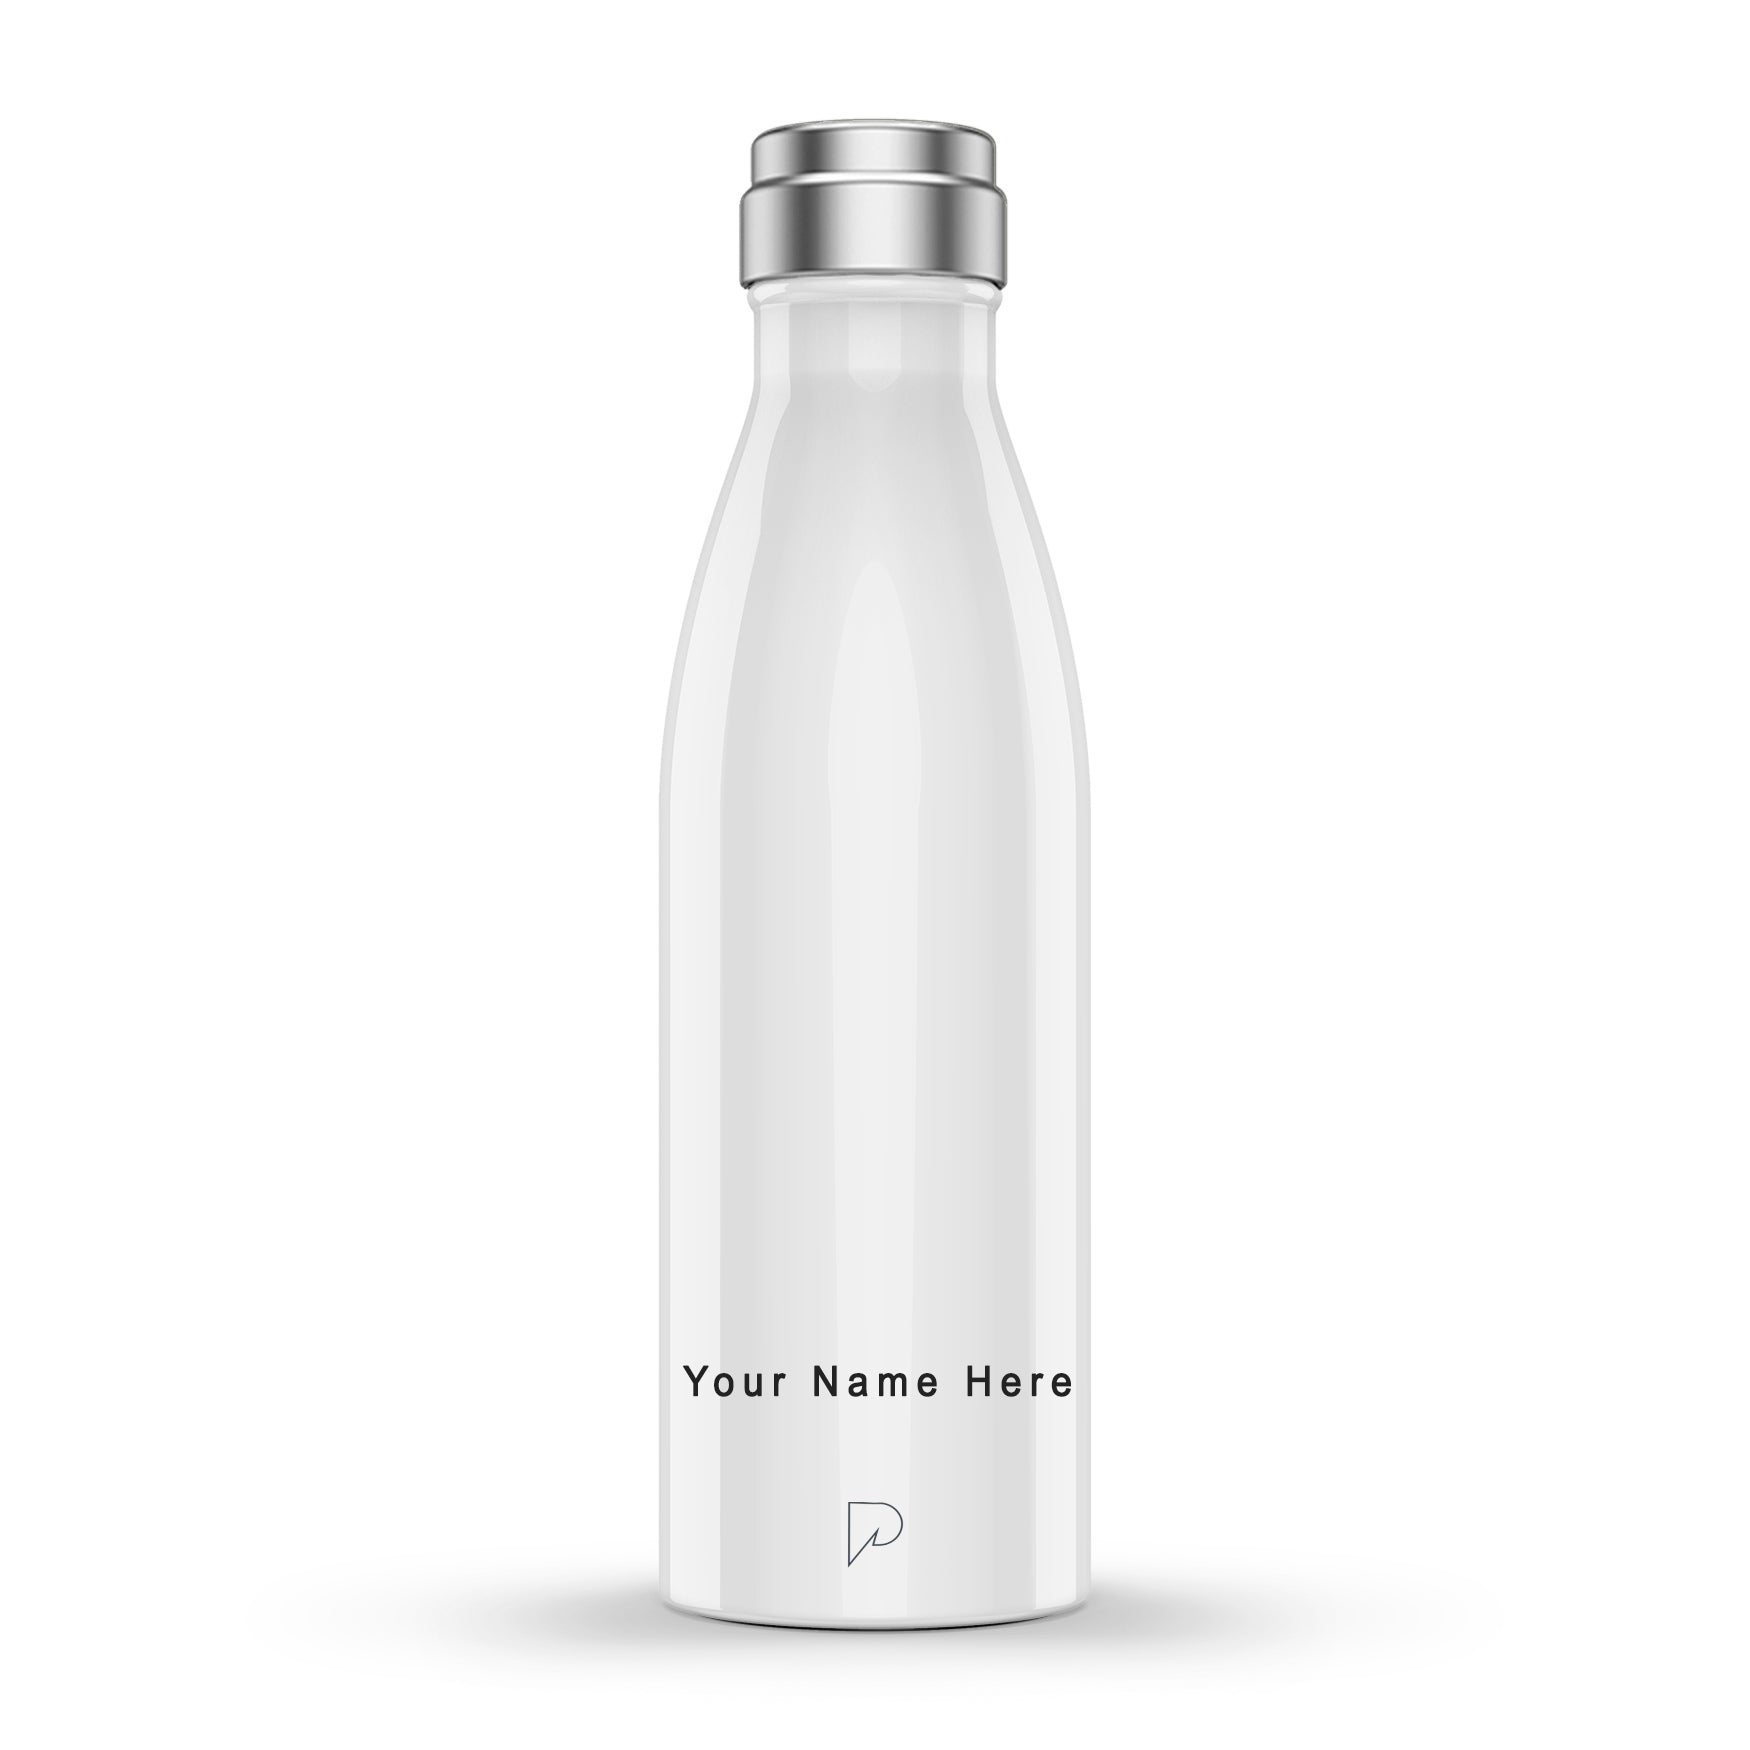 Classic White Stainless Steel Bottle